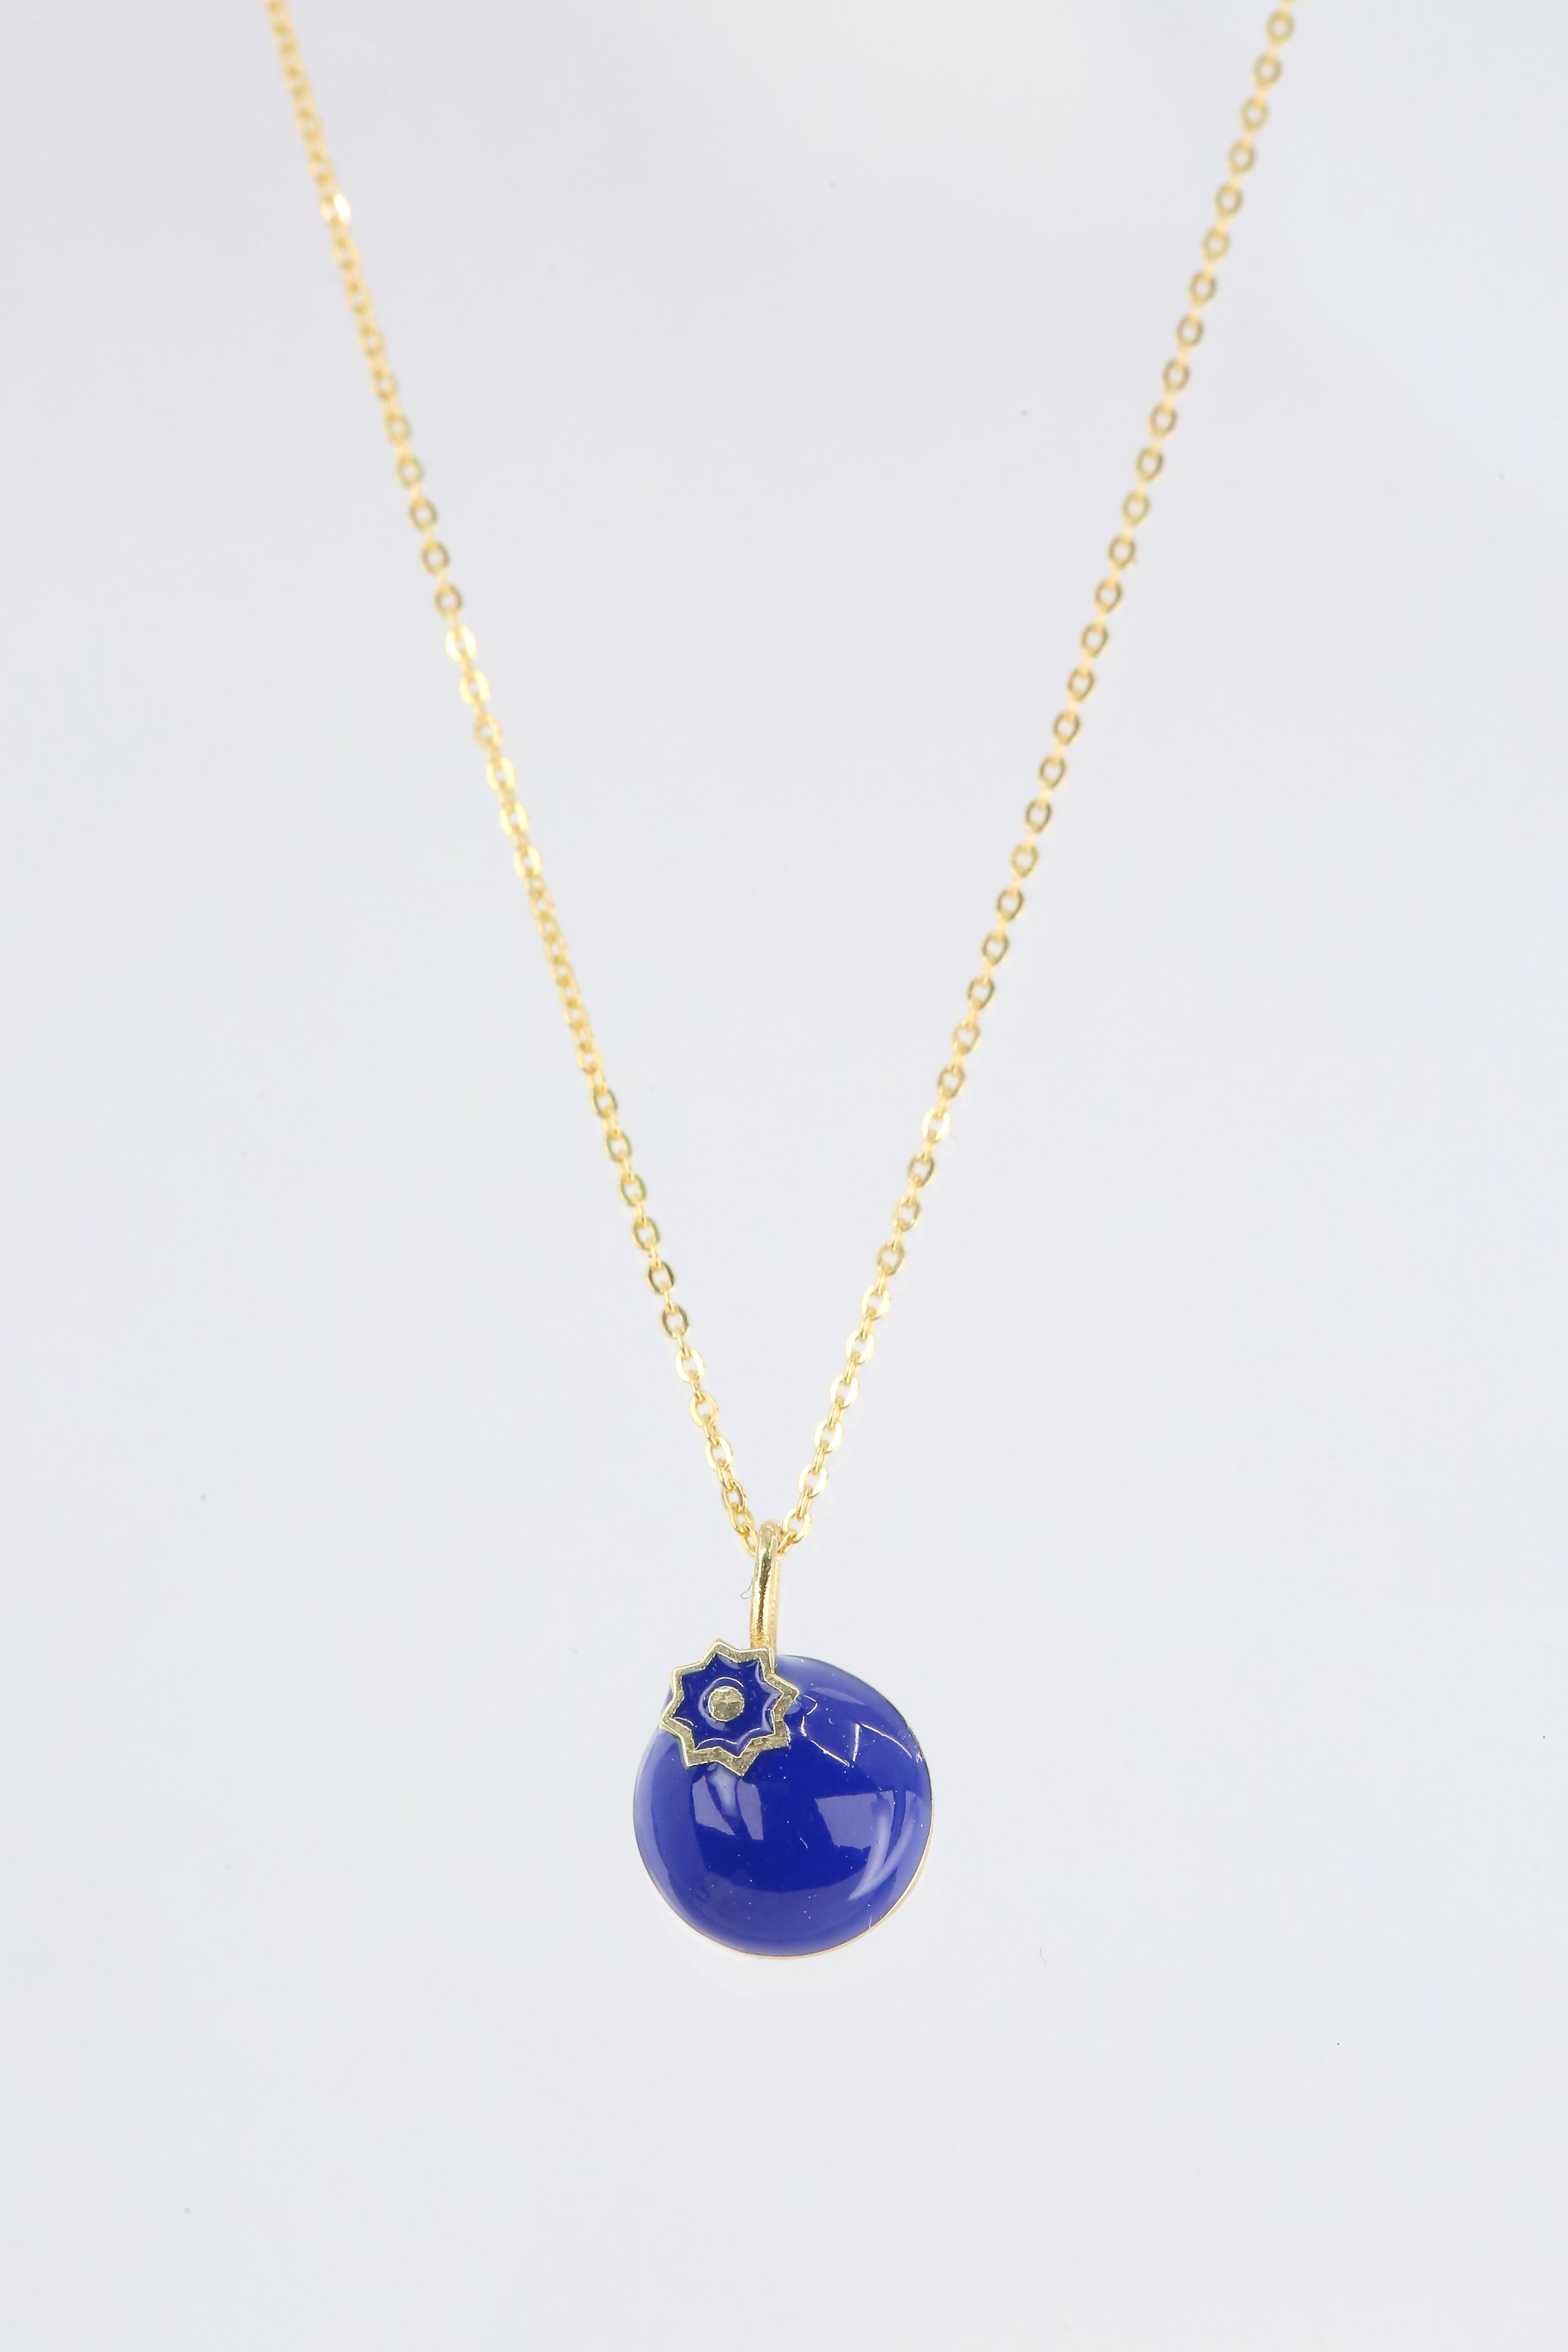 14K Gold Blueberry Necklace - Enamel Fruit Necklace

Special desing necklace with enamel. It’s a manual labour product. ‘Handmade’. Fashionable product. 

This necklace was made with quality materials and excellent handwork. I guarantee  the quality